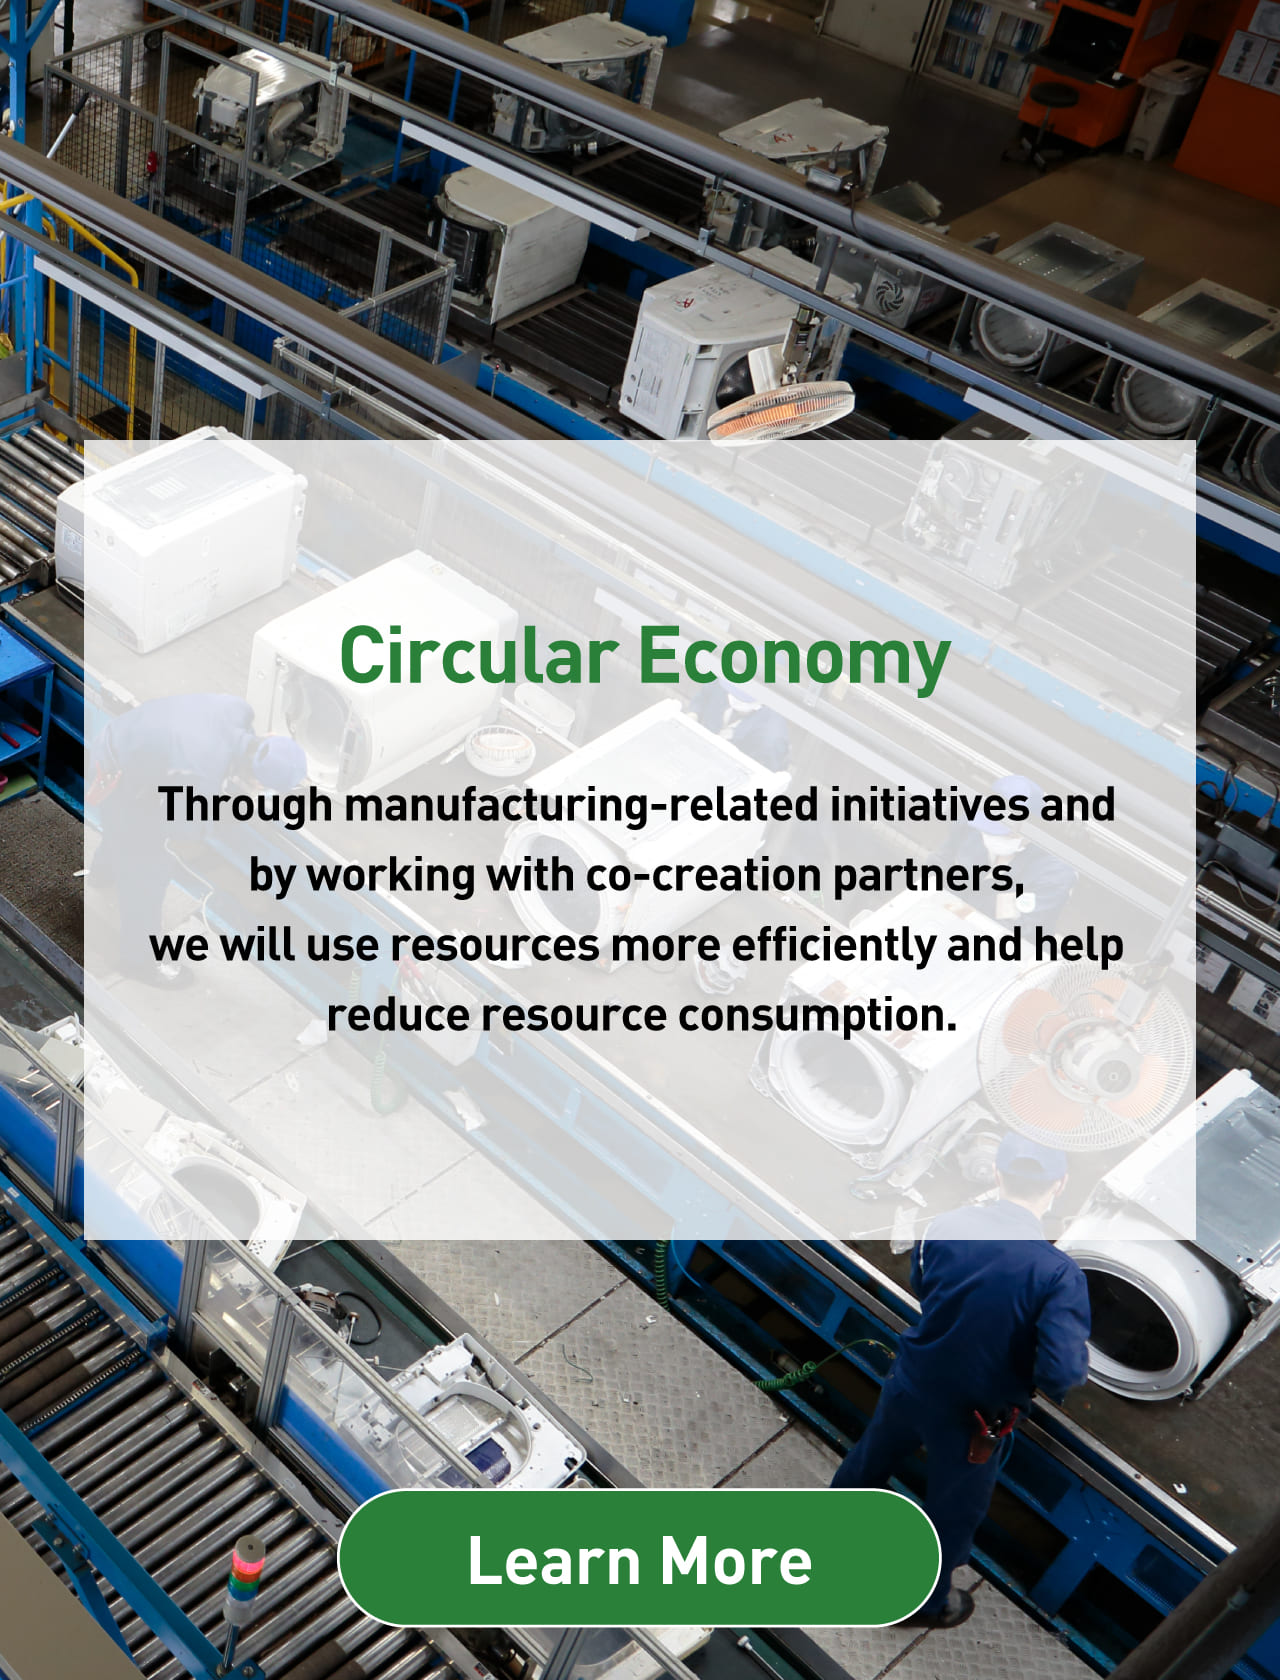 Circular Economy Through manufacturing-related initiatives and by working with co-creation partners, we will use resources more efficiently and help reduce resource consumption. Learn More 